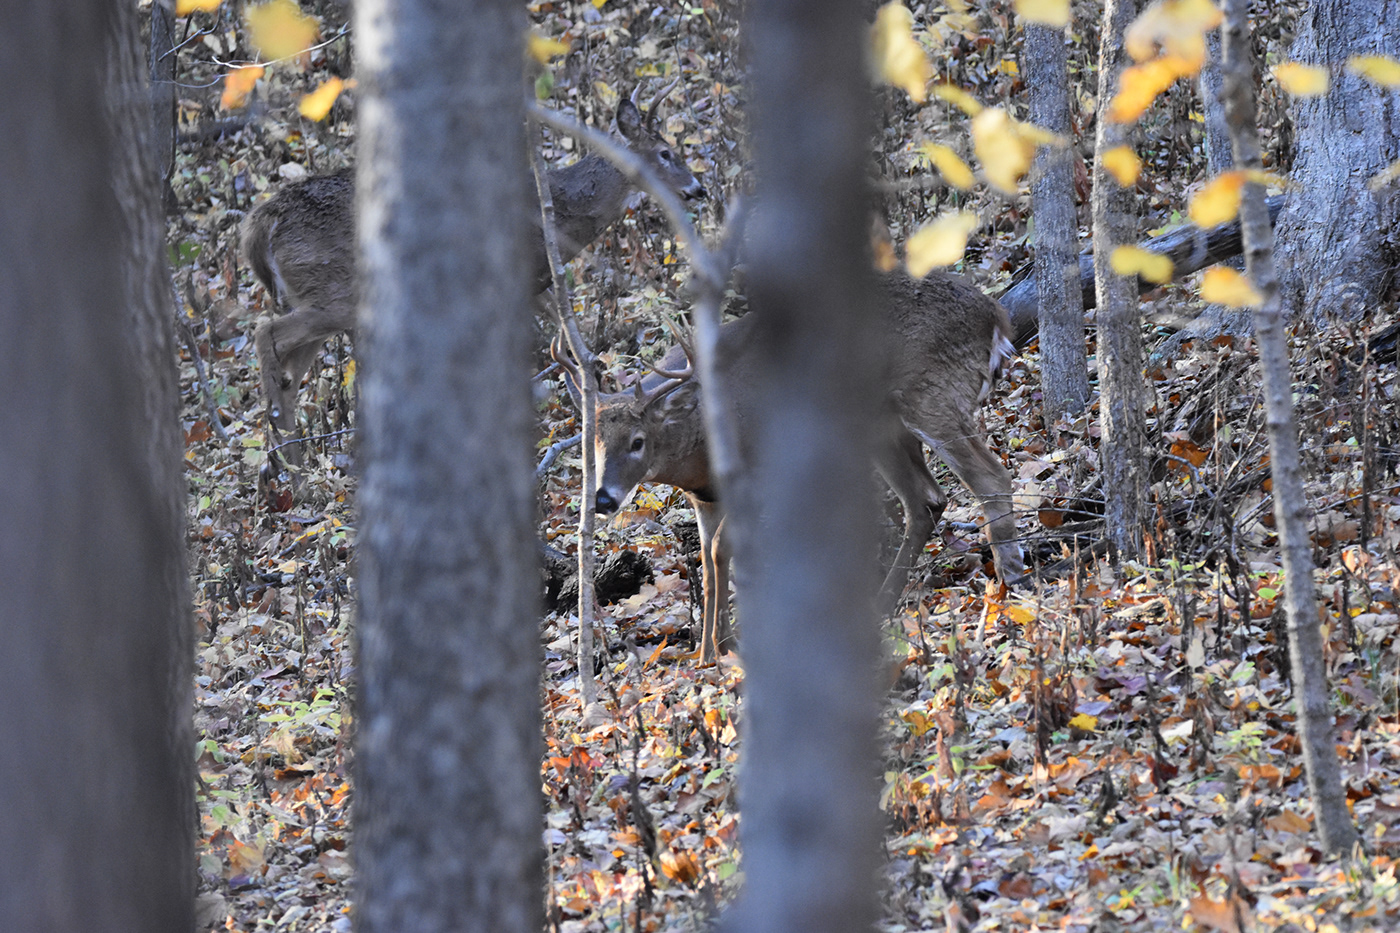 Whitetail Deer deer animal wildlife Photography  midwest iowa forest Whitetail outdoors